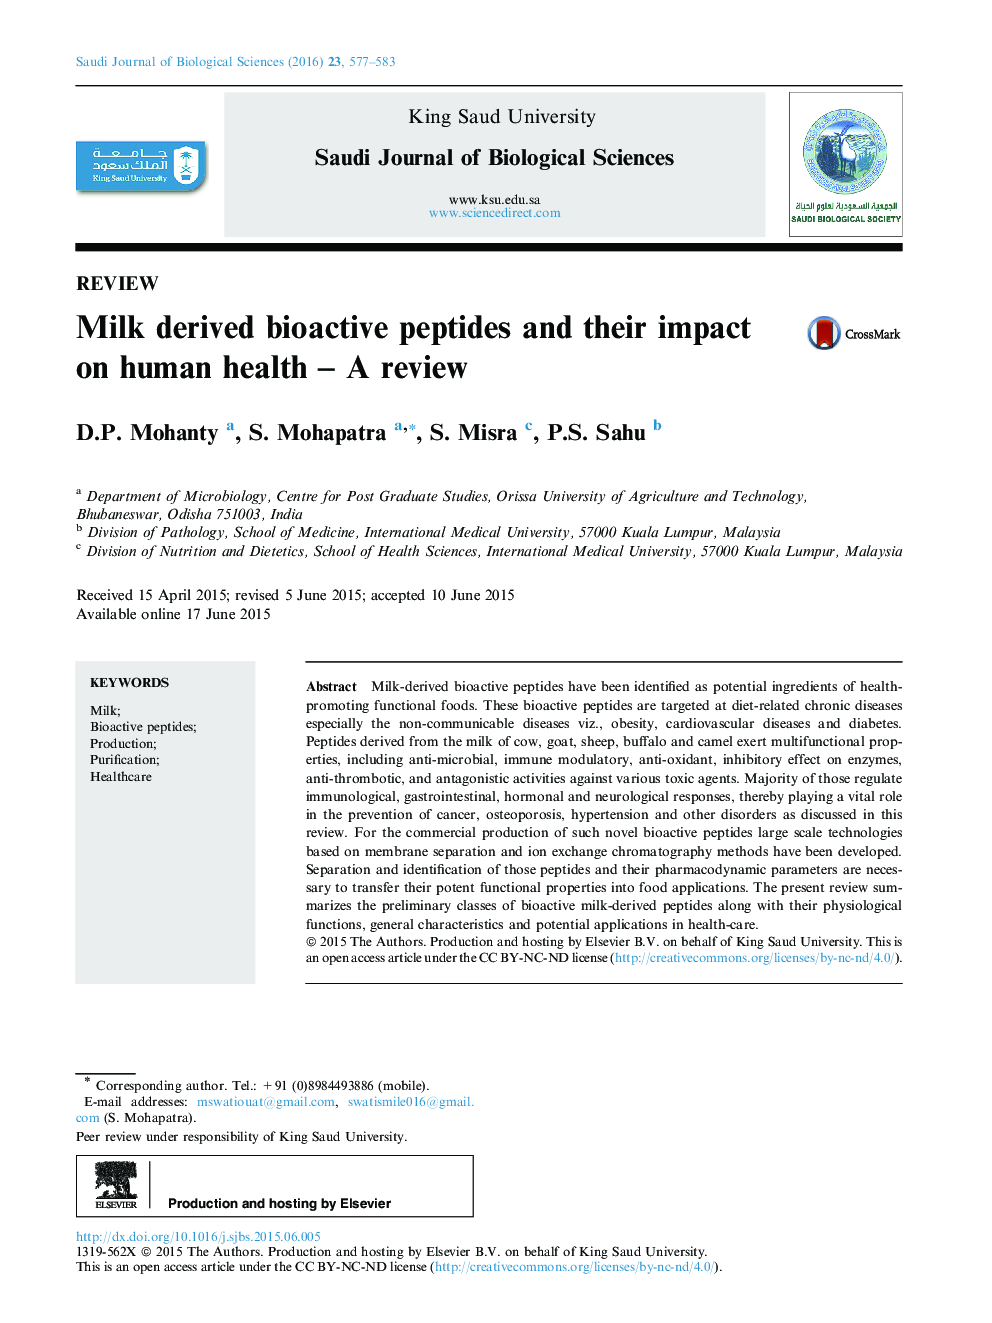 Milk derived bioactive peptides and their impact on human health – A review 